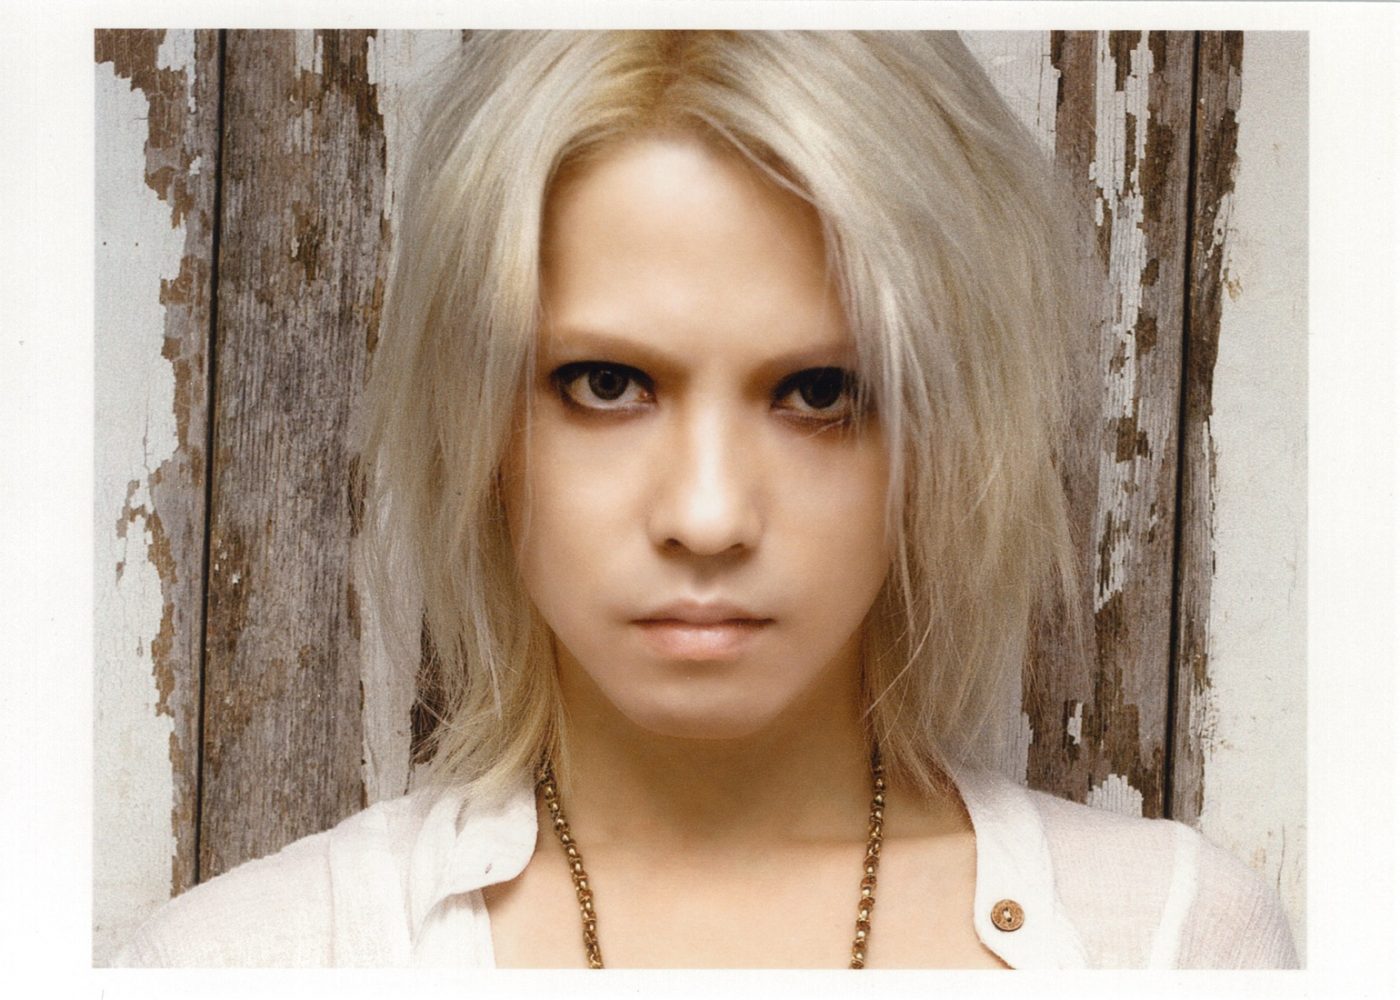 HYDE、『HYDE COMPLETE BOX 2001-2003』の商品のヴィジュアルを一部公開 - 画像一覧（4/4）